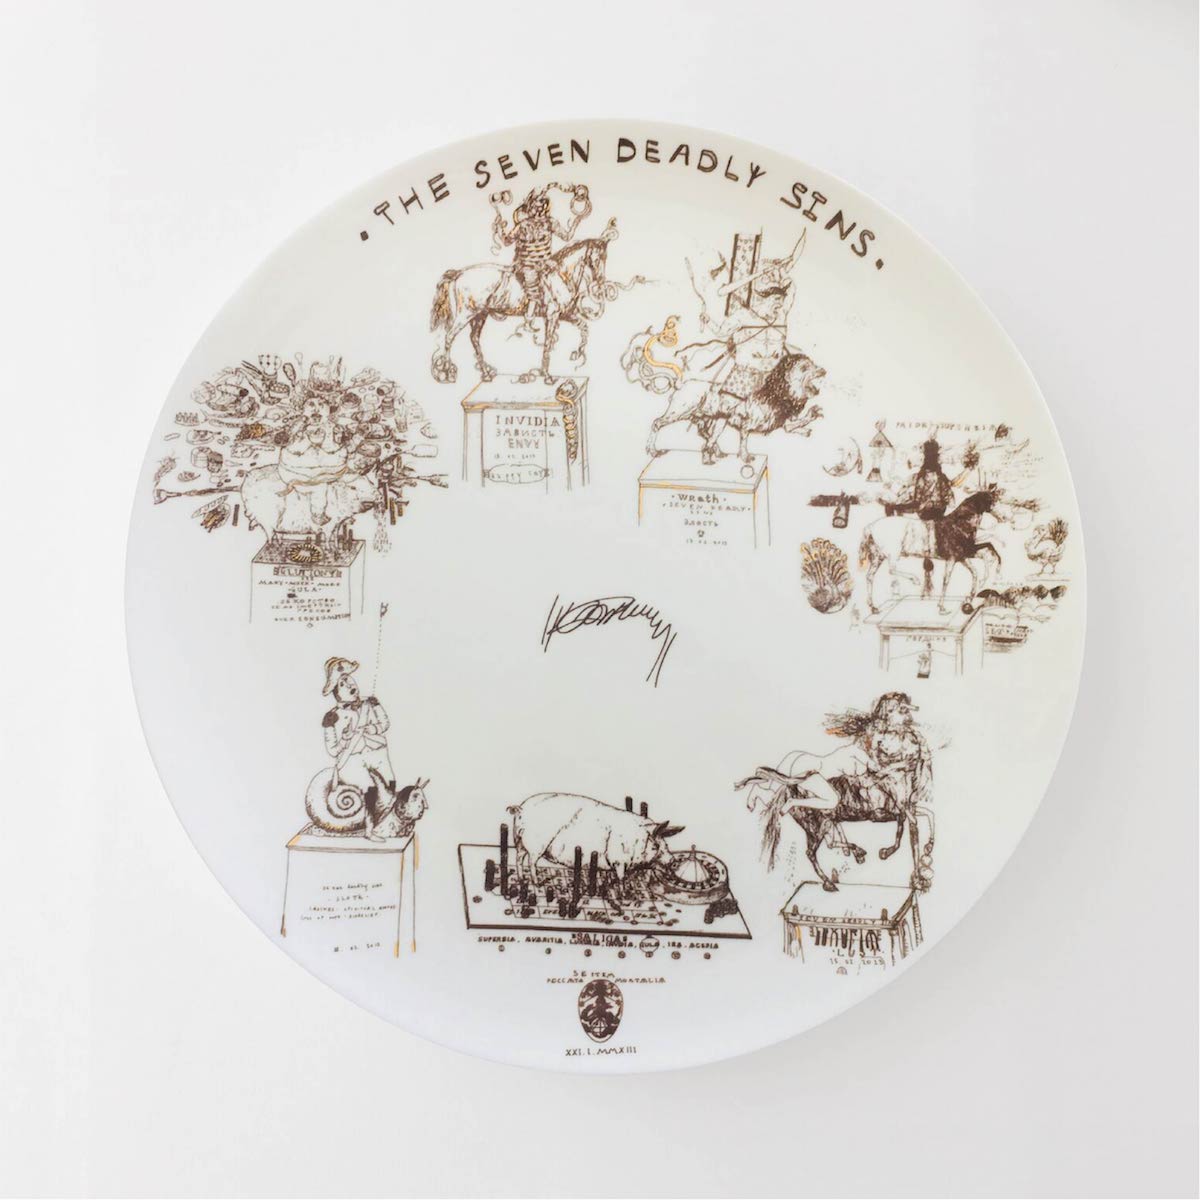 The Seven Deadly Sins plate